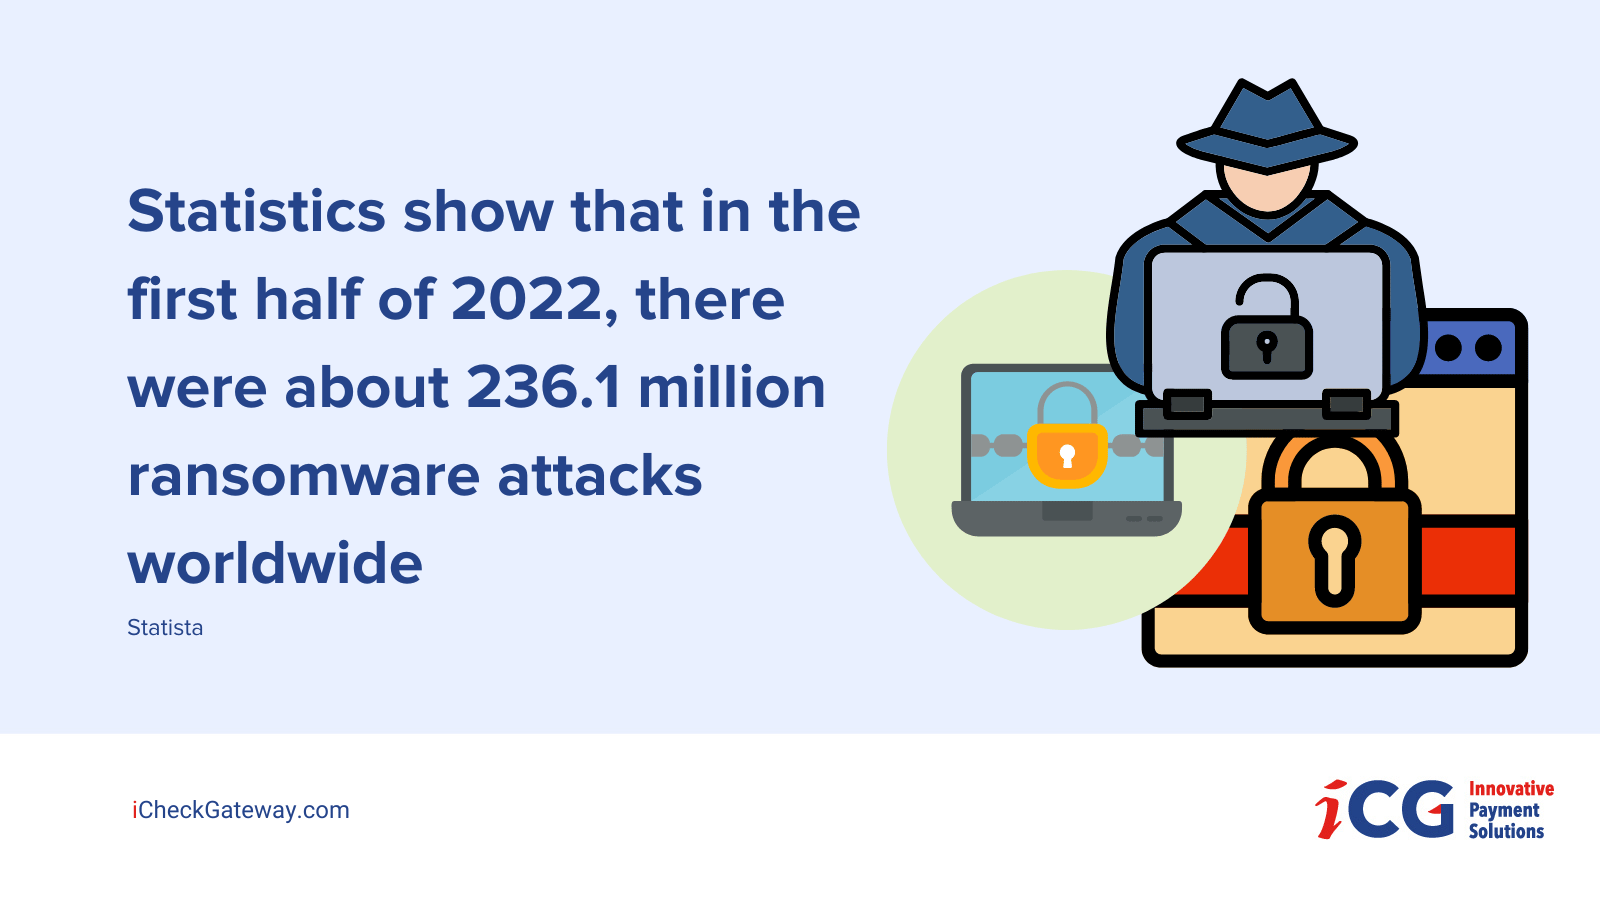 Statistics show that in the first half of 2022, there were about 236.1 million ransomware attacks worldwide